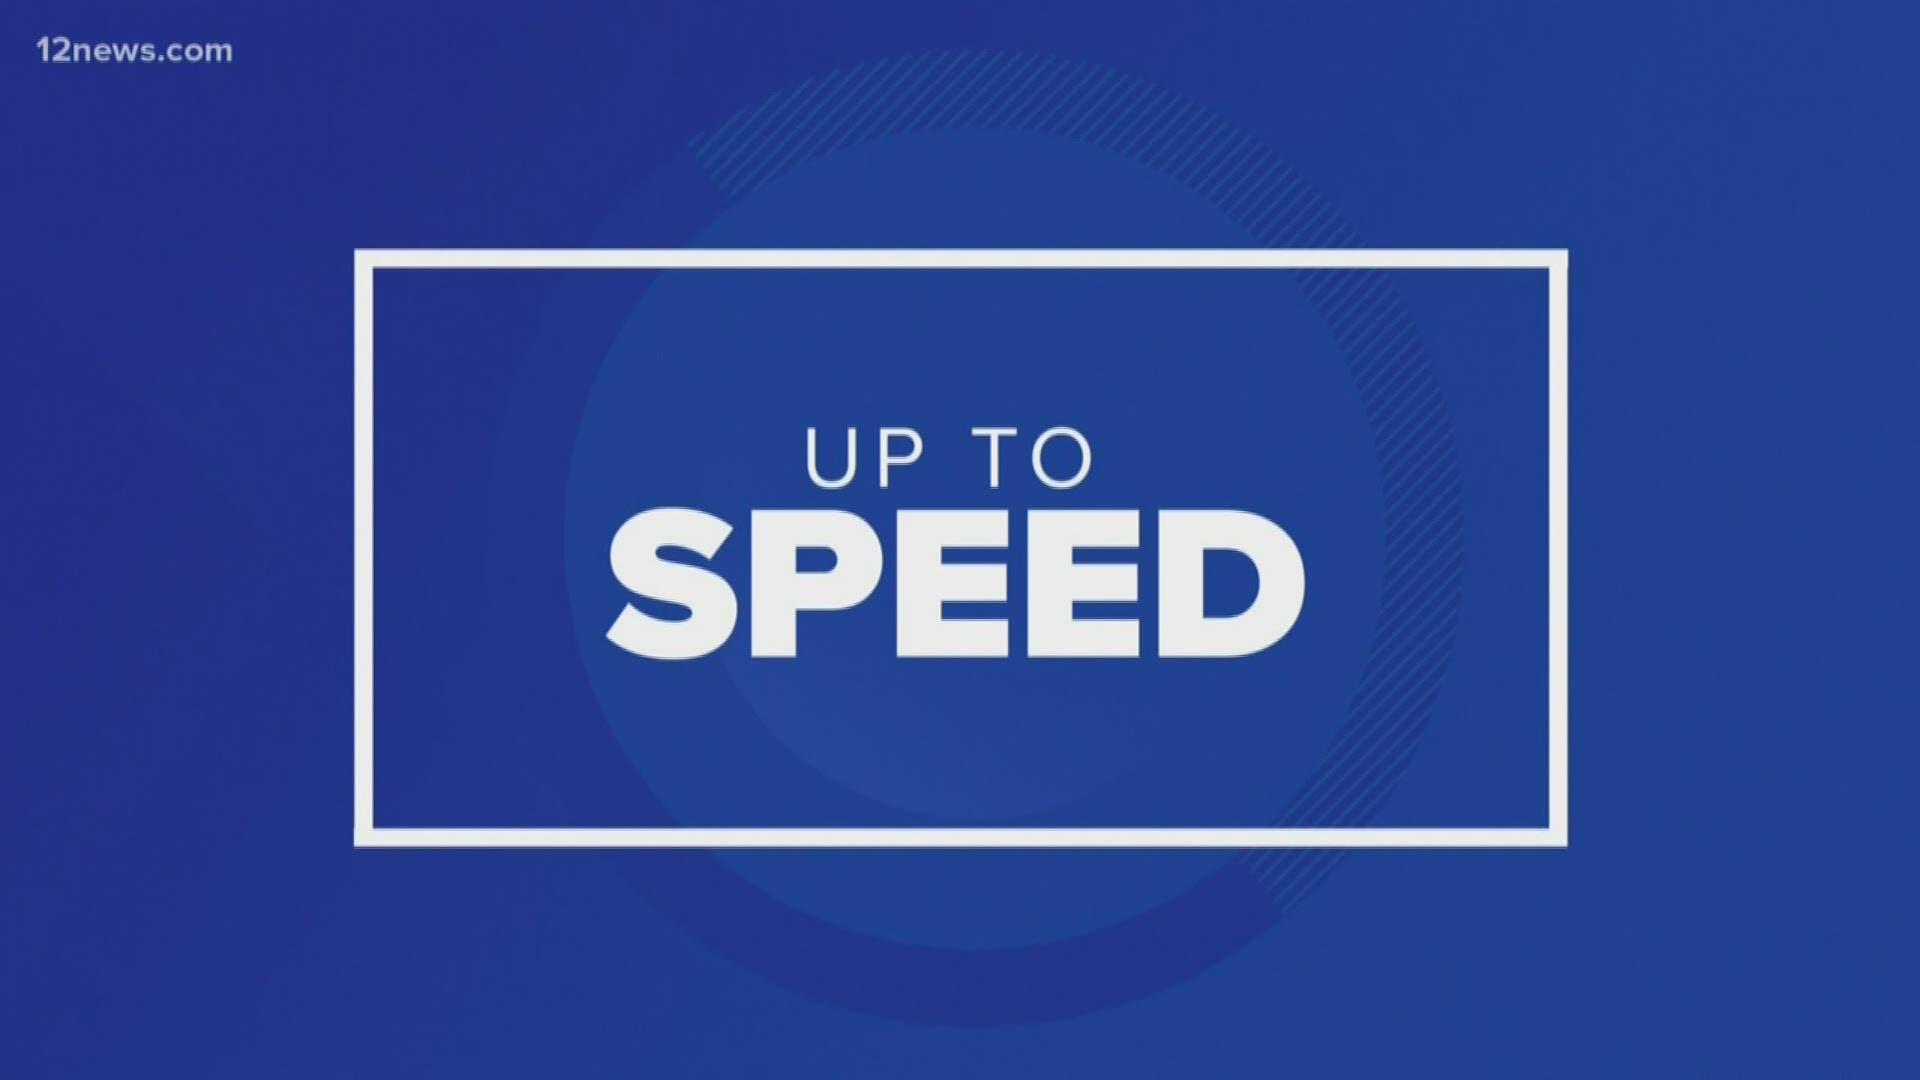 Get "Up to Speed" on the facts unfolding in stories across Arizona and around the world Sunday evening, Jan. 12, 2020.